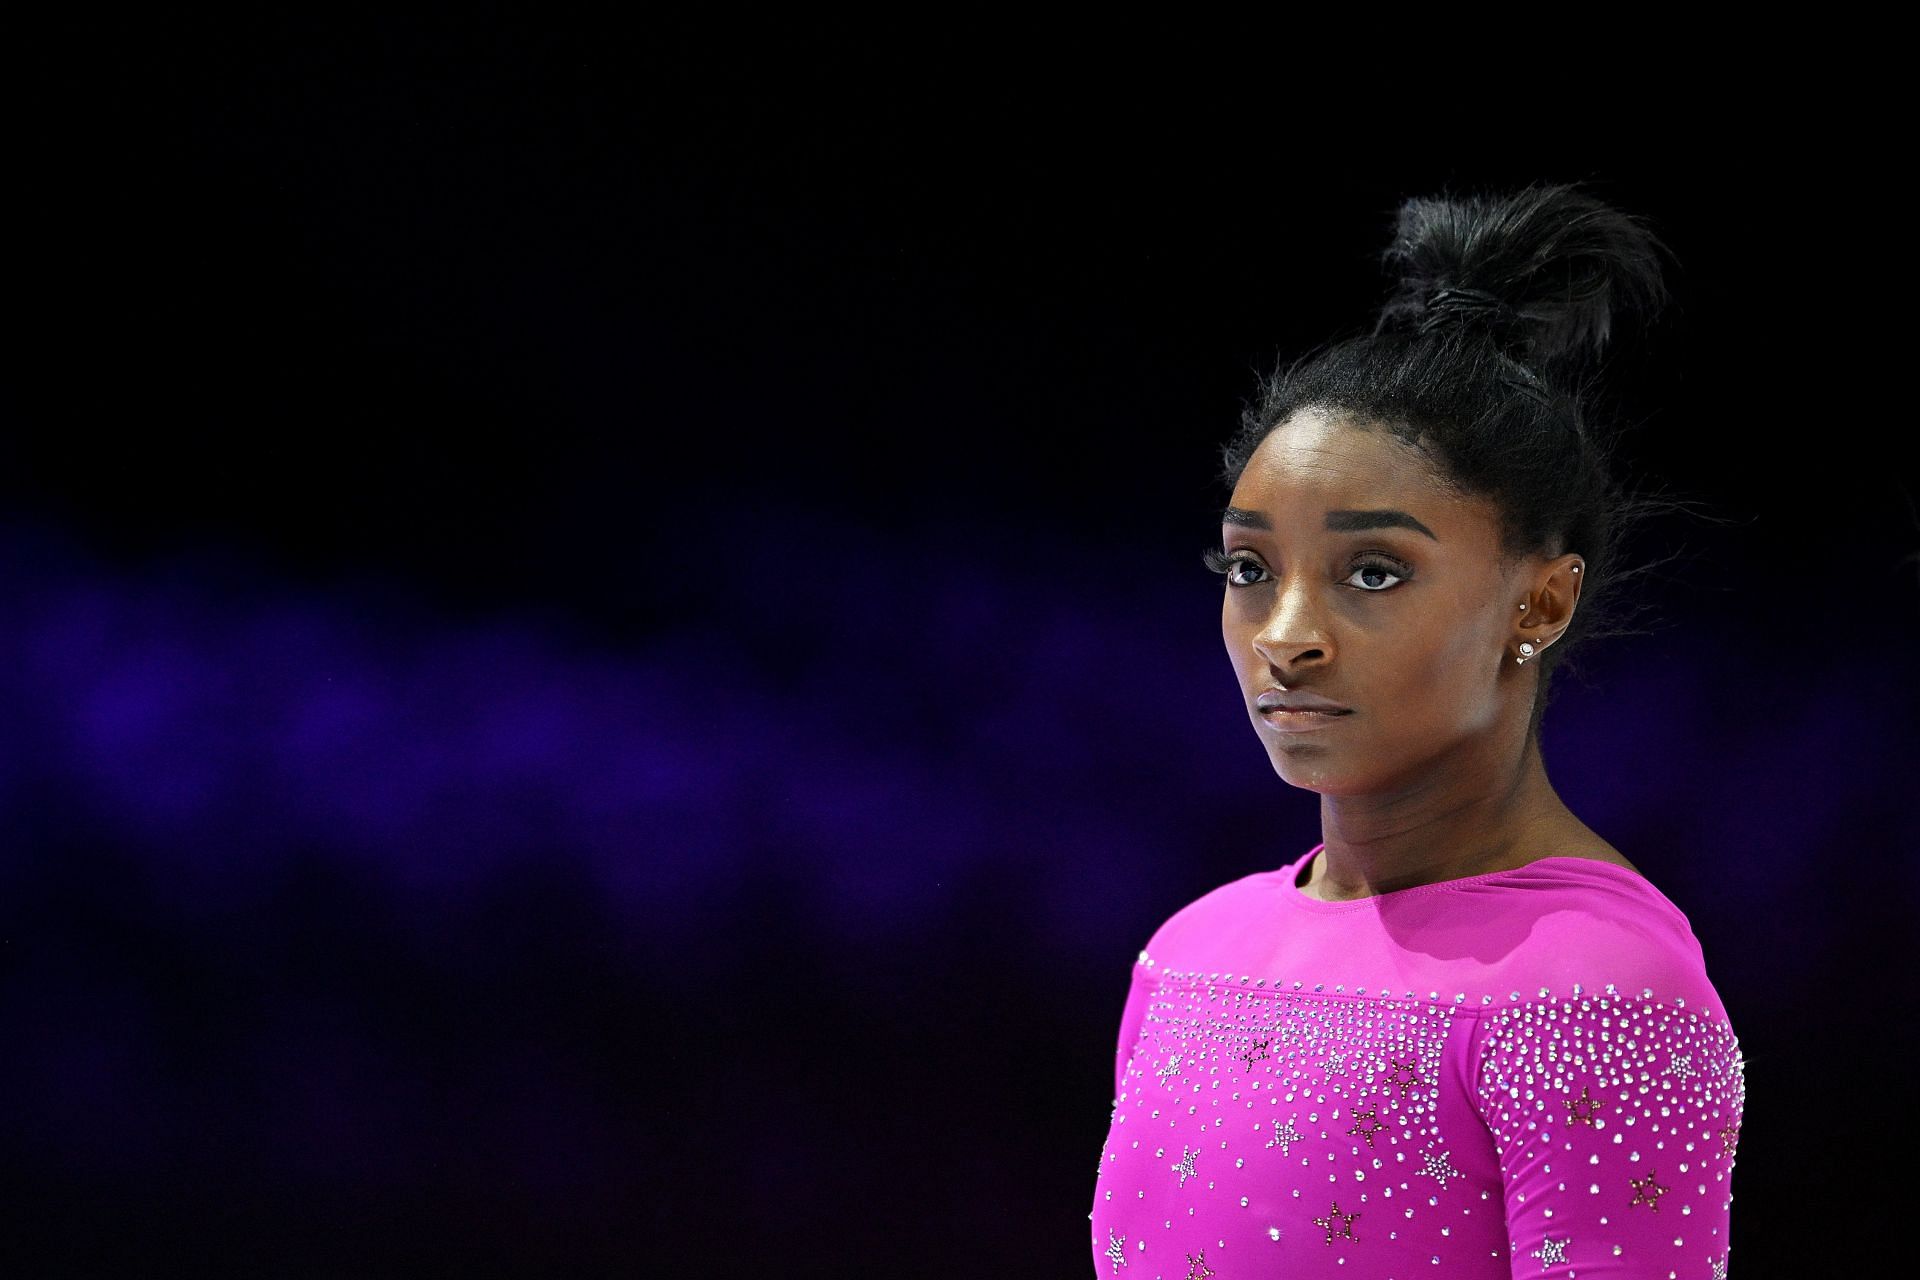 Biles at the Previews of the 2023 FIG Artistic Gymnastics World Championships